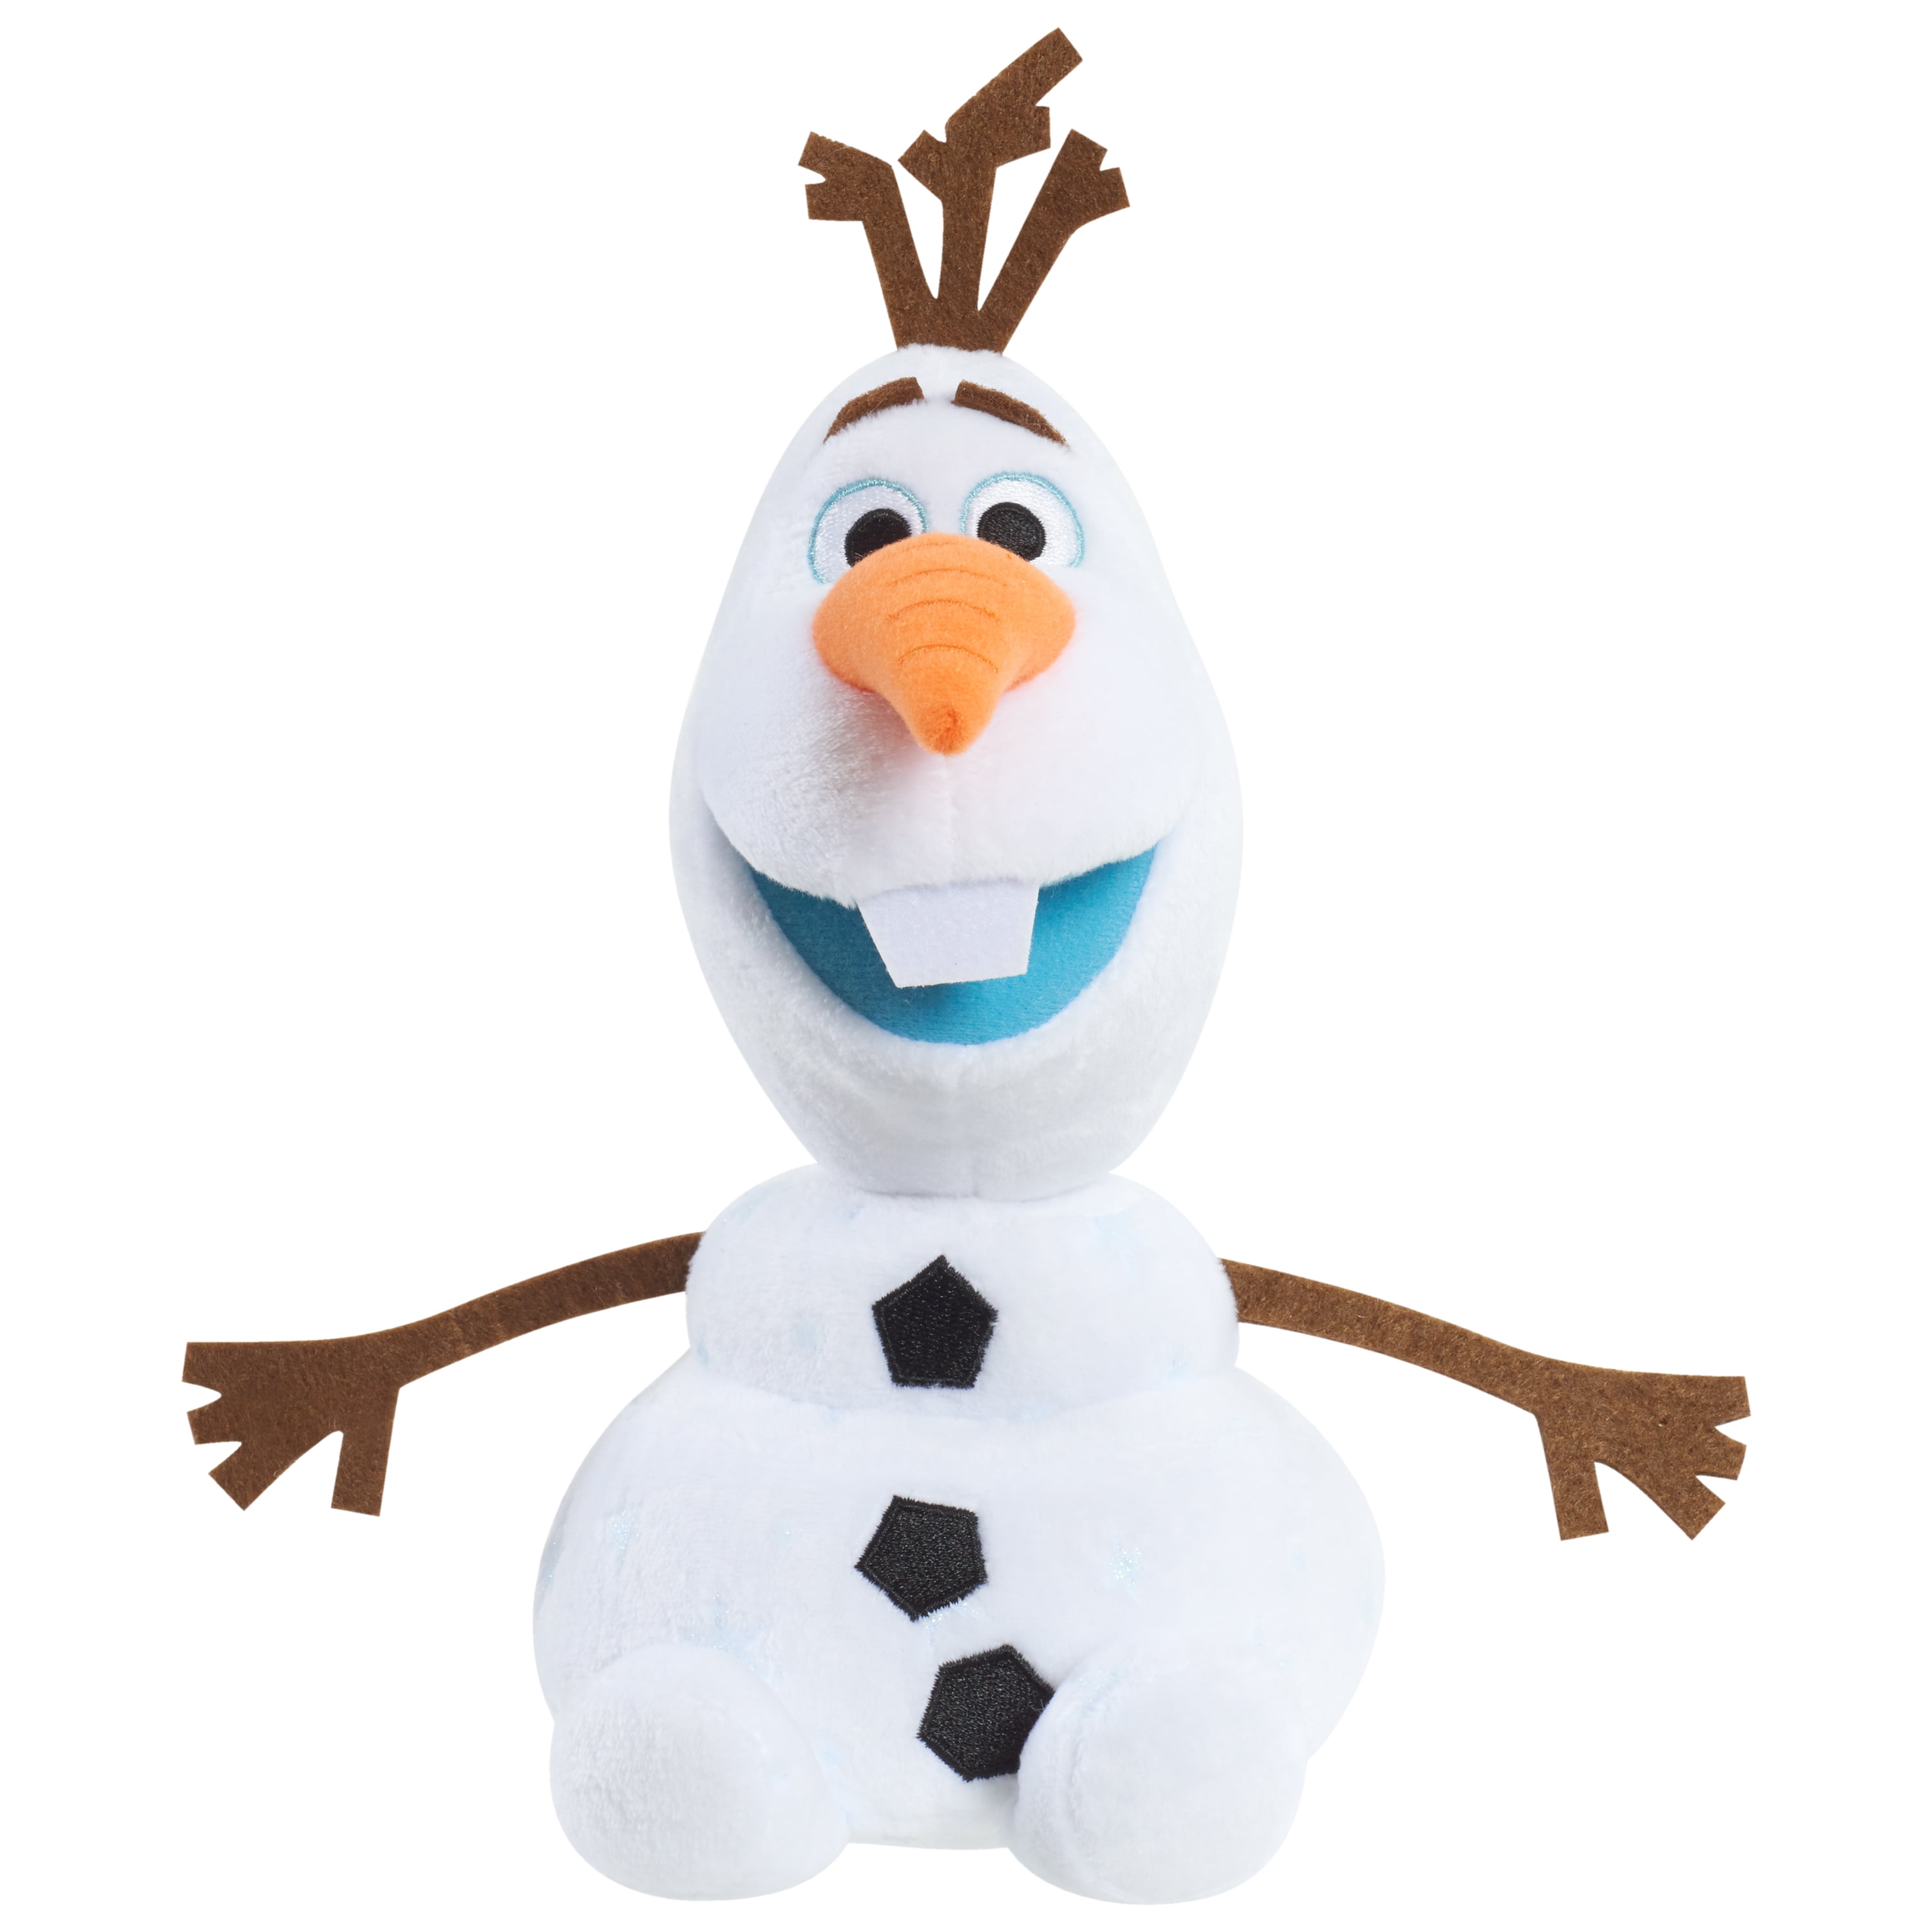 Details about   NEW Authentic Pillow Pets Disney Frozen Olaf Large 18" Plush Toy Gift FROZEN II